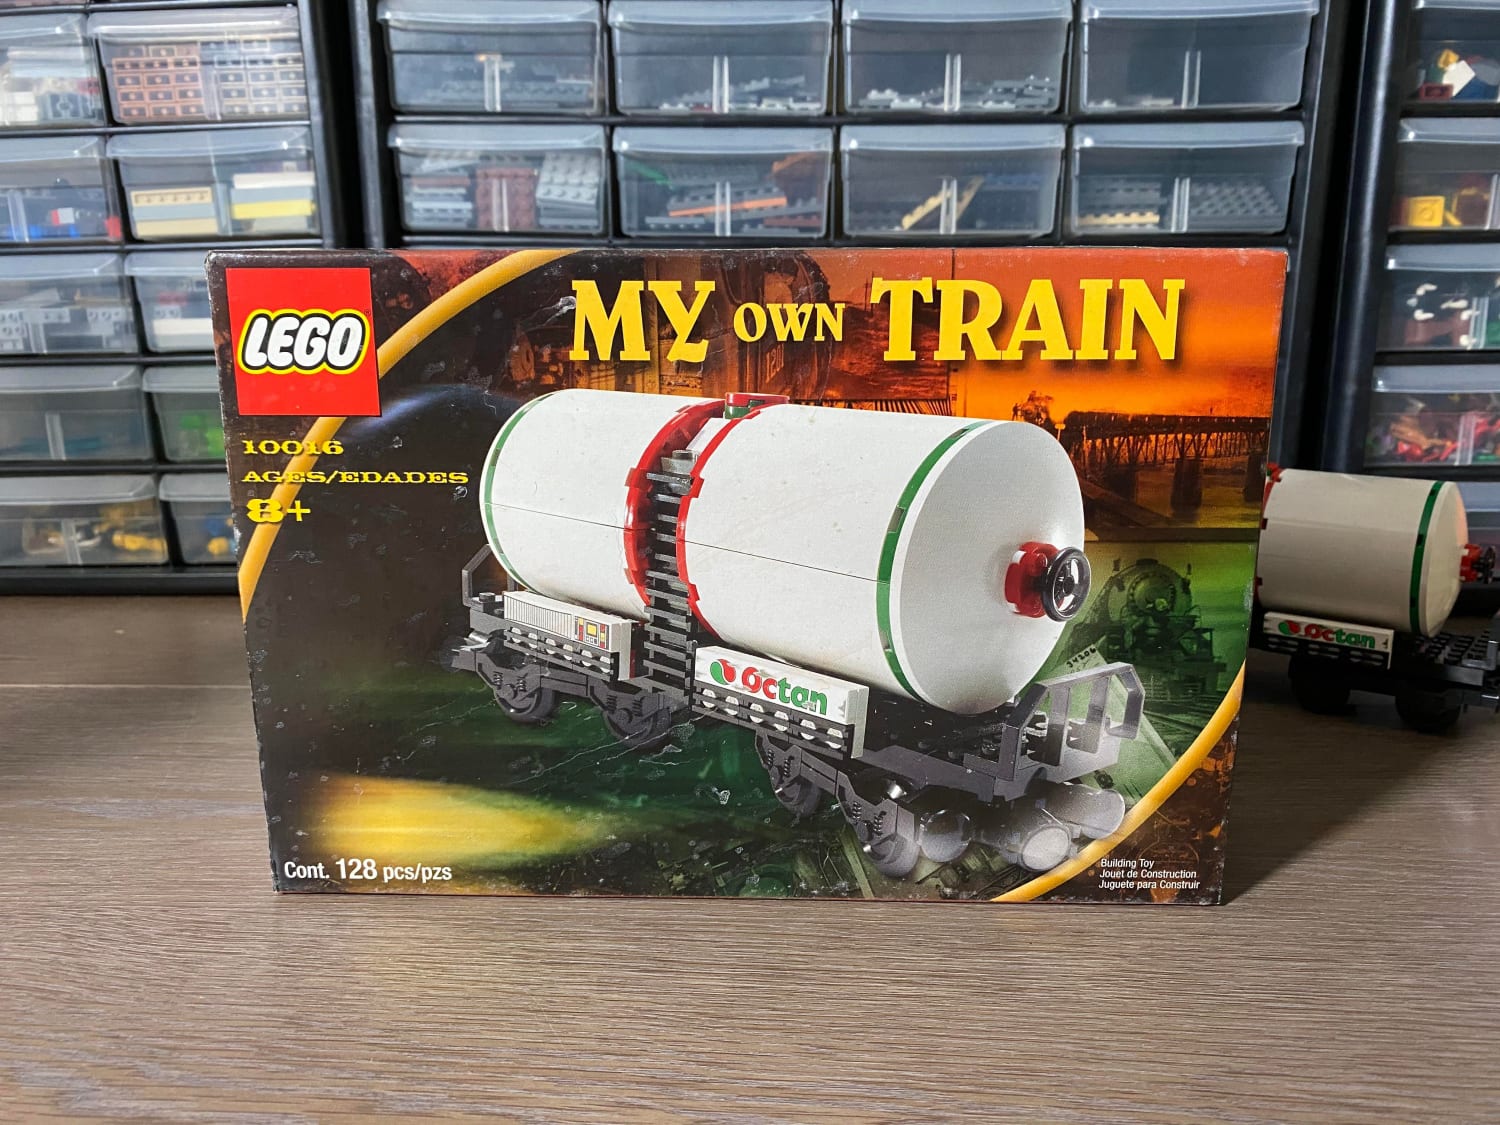 Do you think Lego will ever bring back individual train car sets?